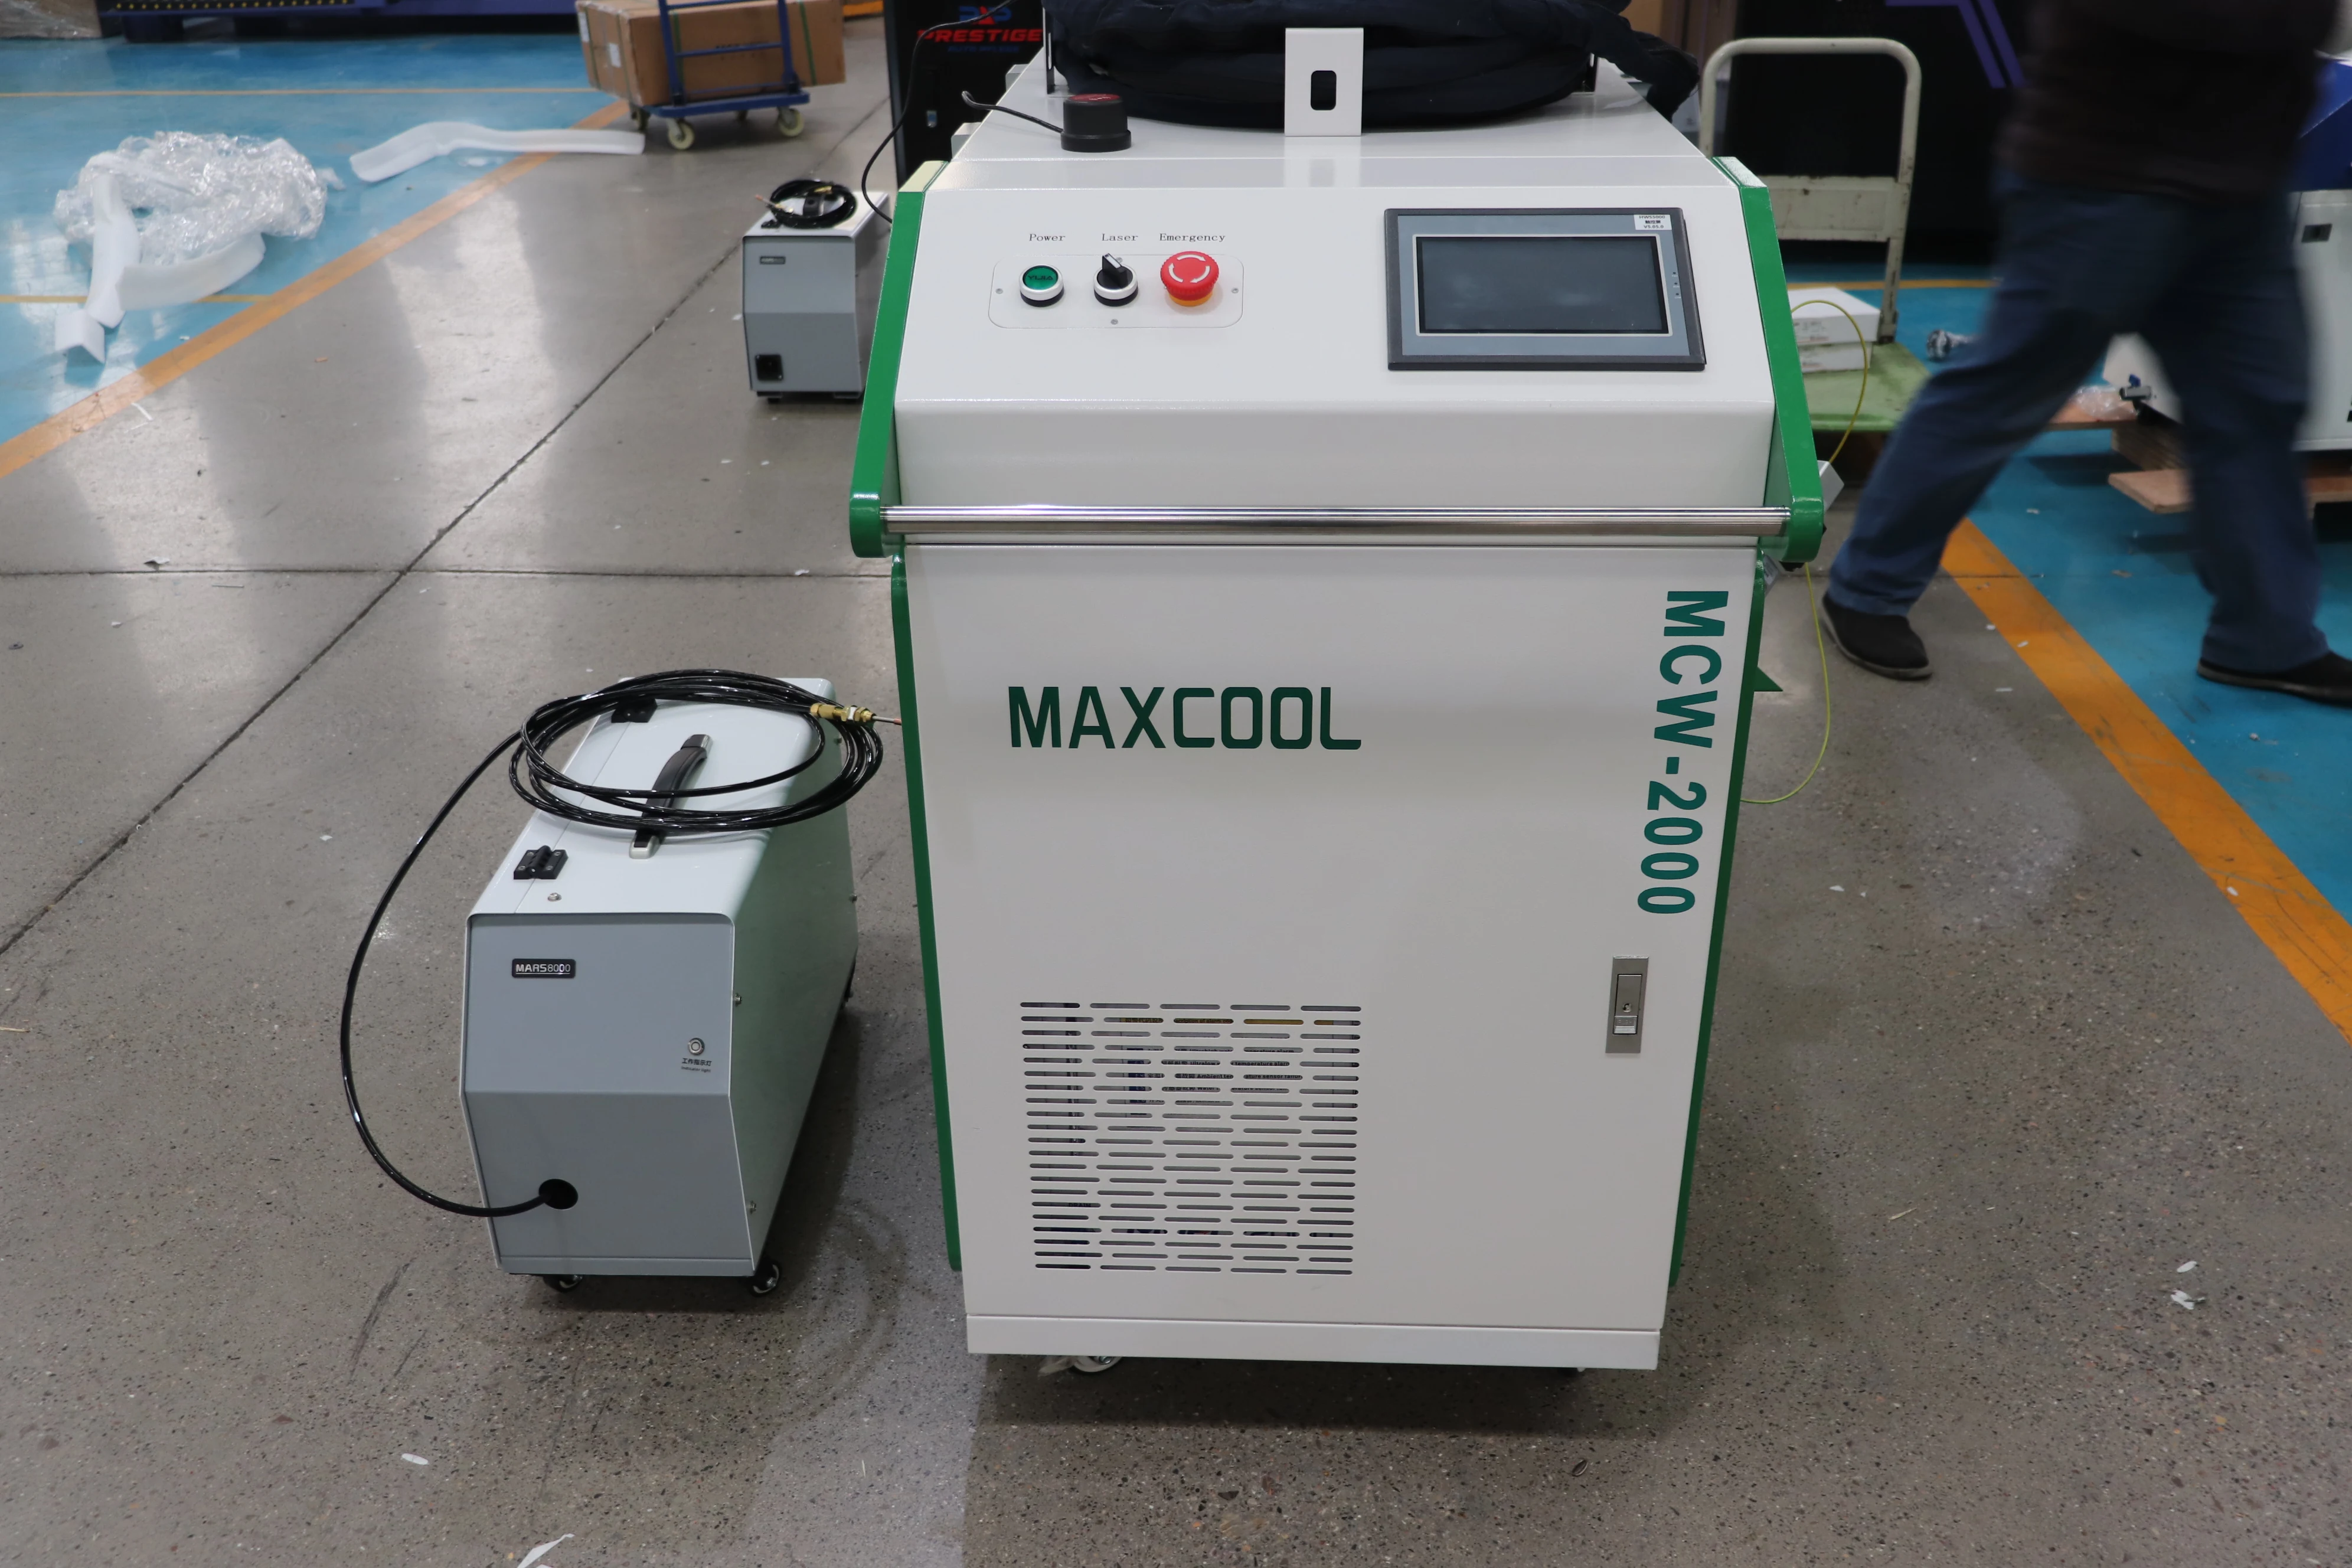 

MetaL Welder 2KW Fast and Neat Laser Welding Machine Rust Paint Cleaning Machine CW Fiber Laser Handheld Cutter for Tube Sheet